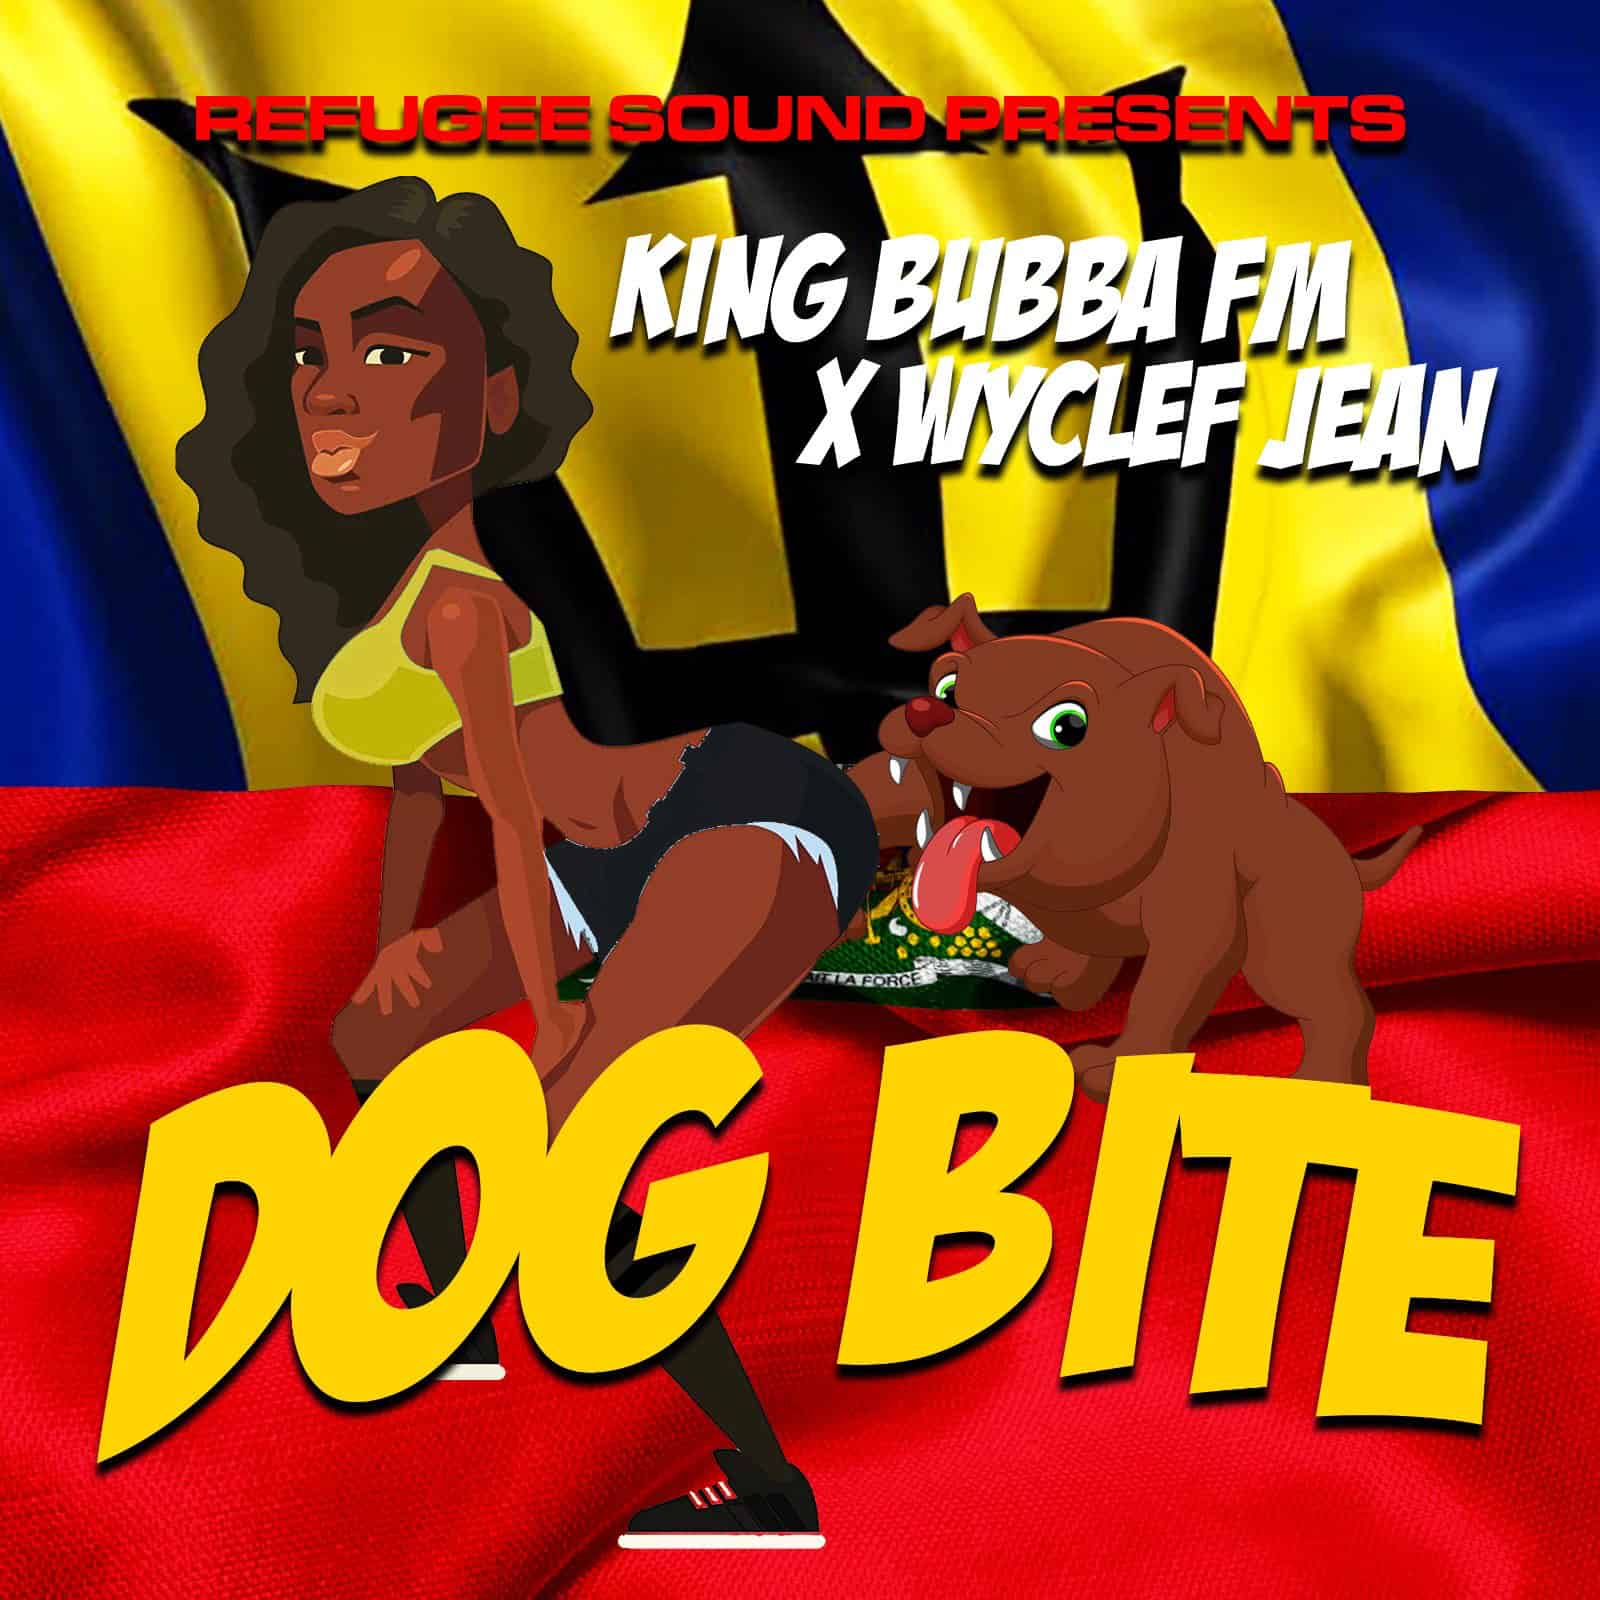 Refugee Sound Presents Wyclef Jean and King Bubba FM - Dog Bite